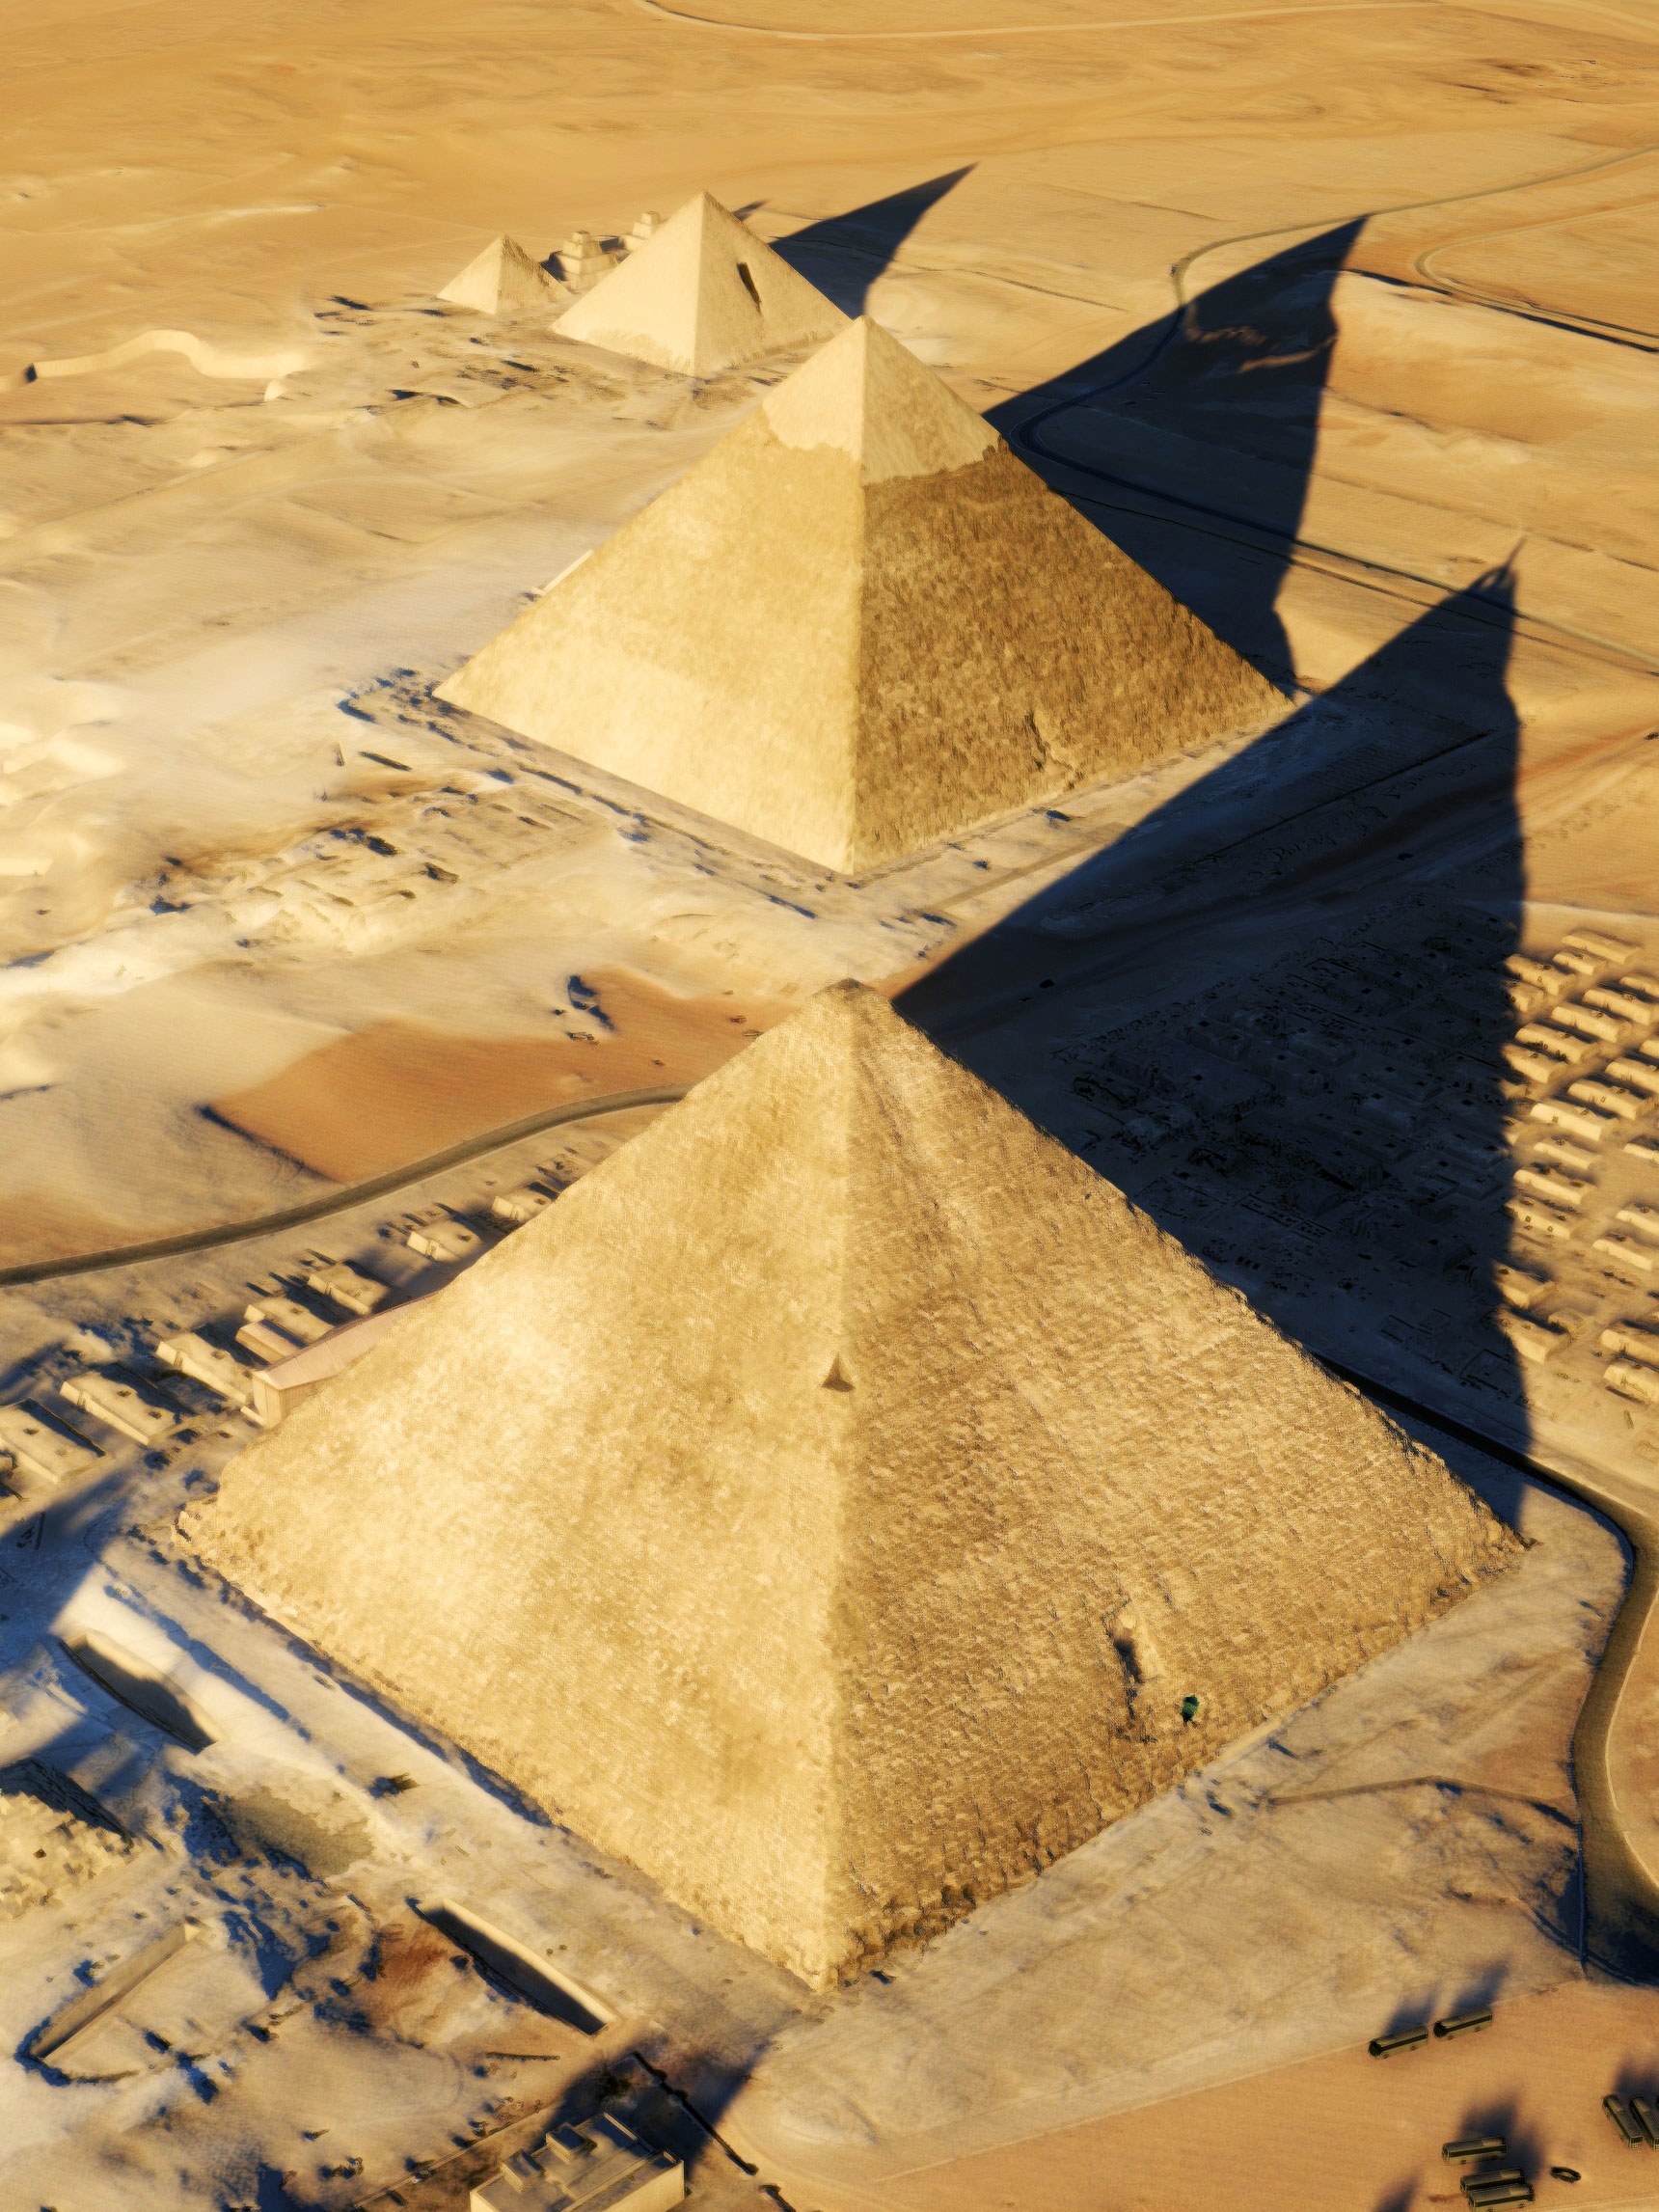 Subatomic Particles Reveal a Hidden Void in the Great Pyramid of ...